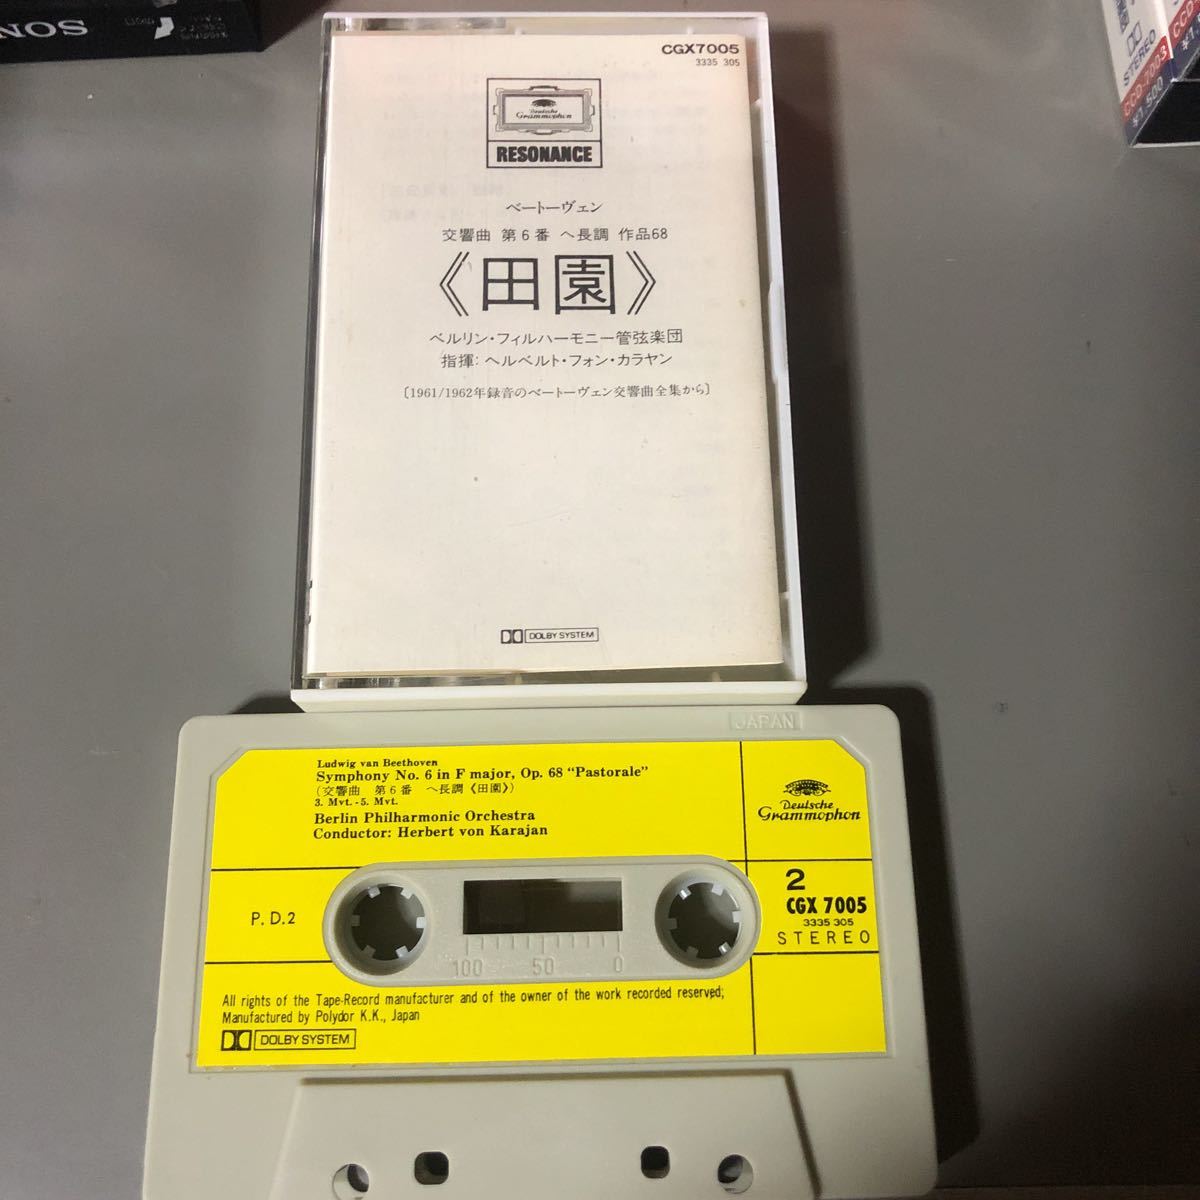  beige to-ven symphony no. 6 number rice field .kalayan finger ., Berlin * Phil is - moni - orchestral music . domestic record cassette tape [ shrink remainder ]#